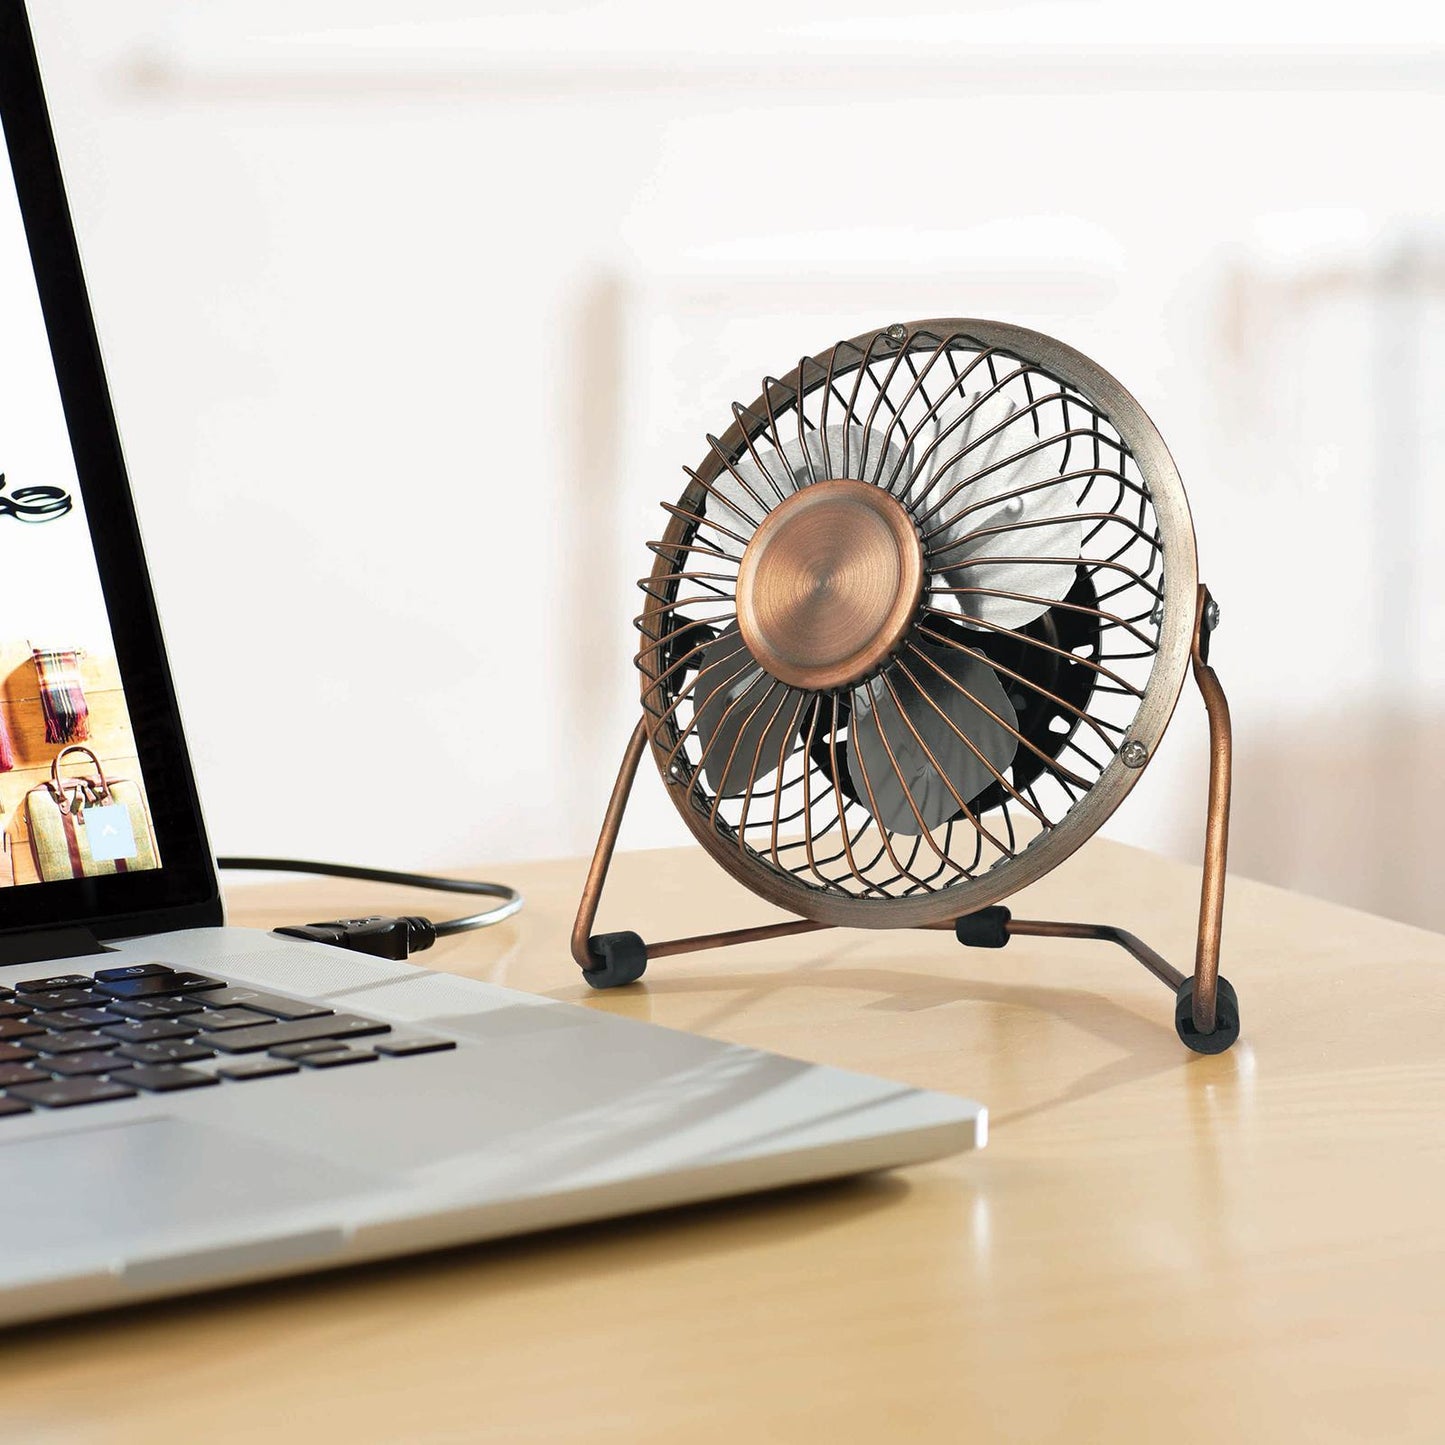 Compact And Portable 4" Desk Fan Ideal For Personal Cooling